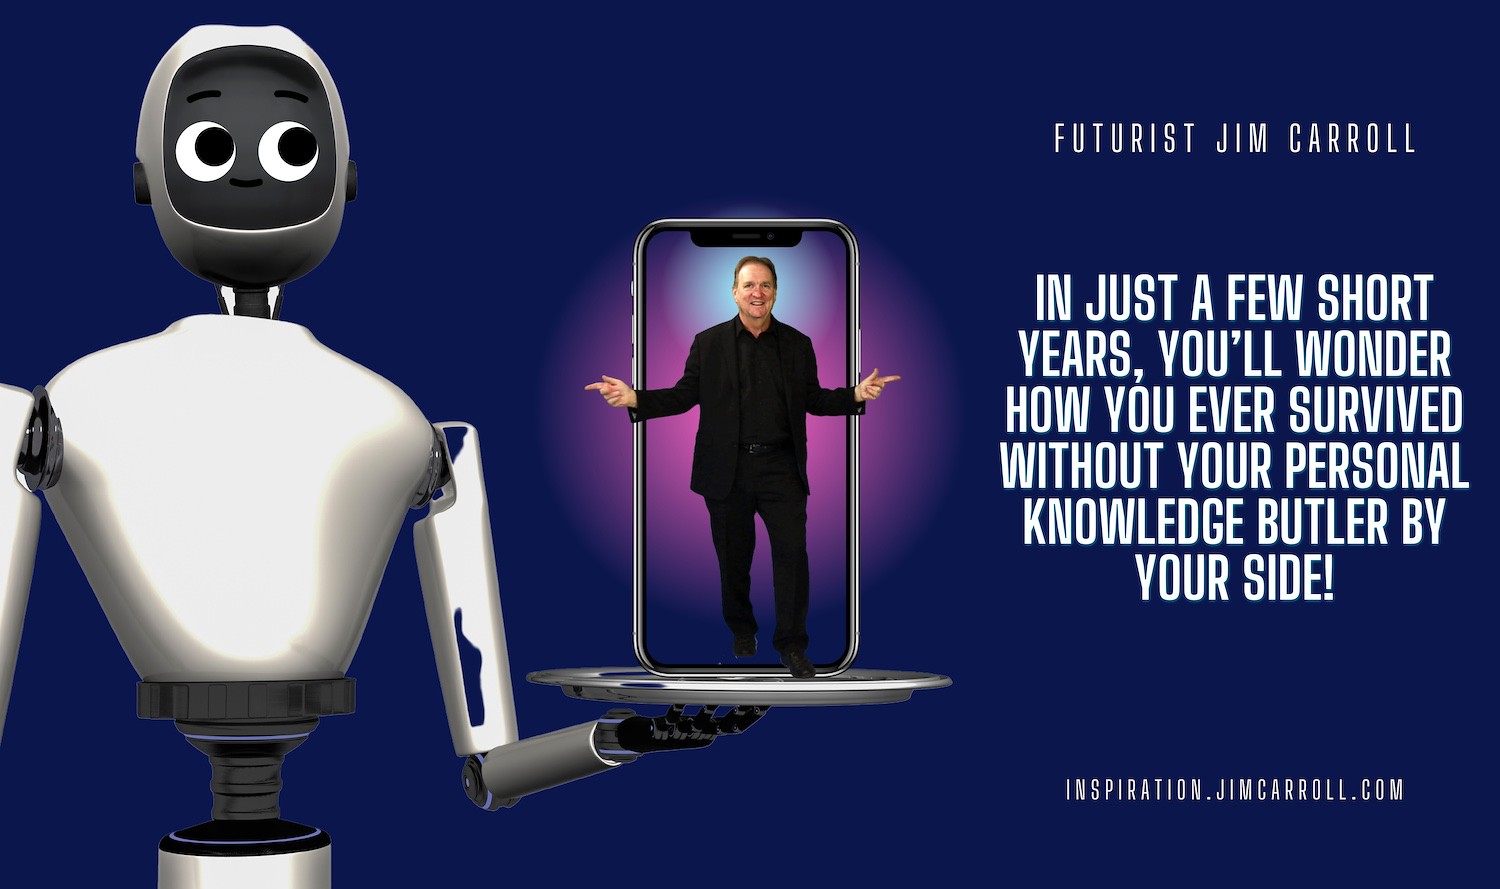 "In just a few short years, you'll wonder how you ever survived without your personal knowledge butler by your side!" - Futurist Jim Carroll